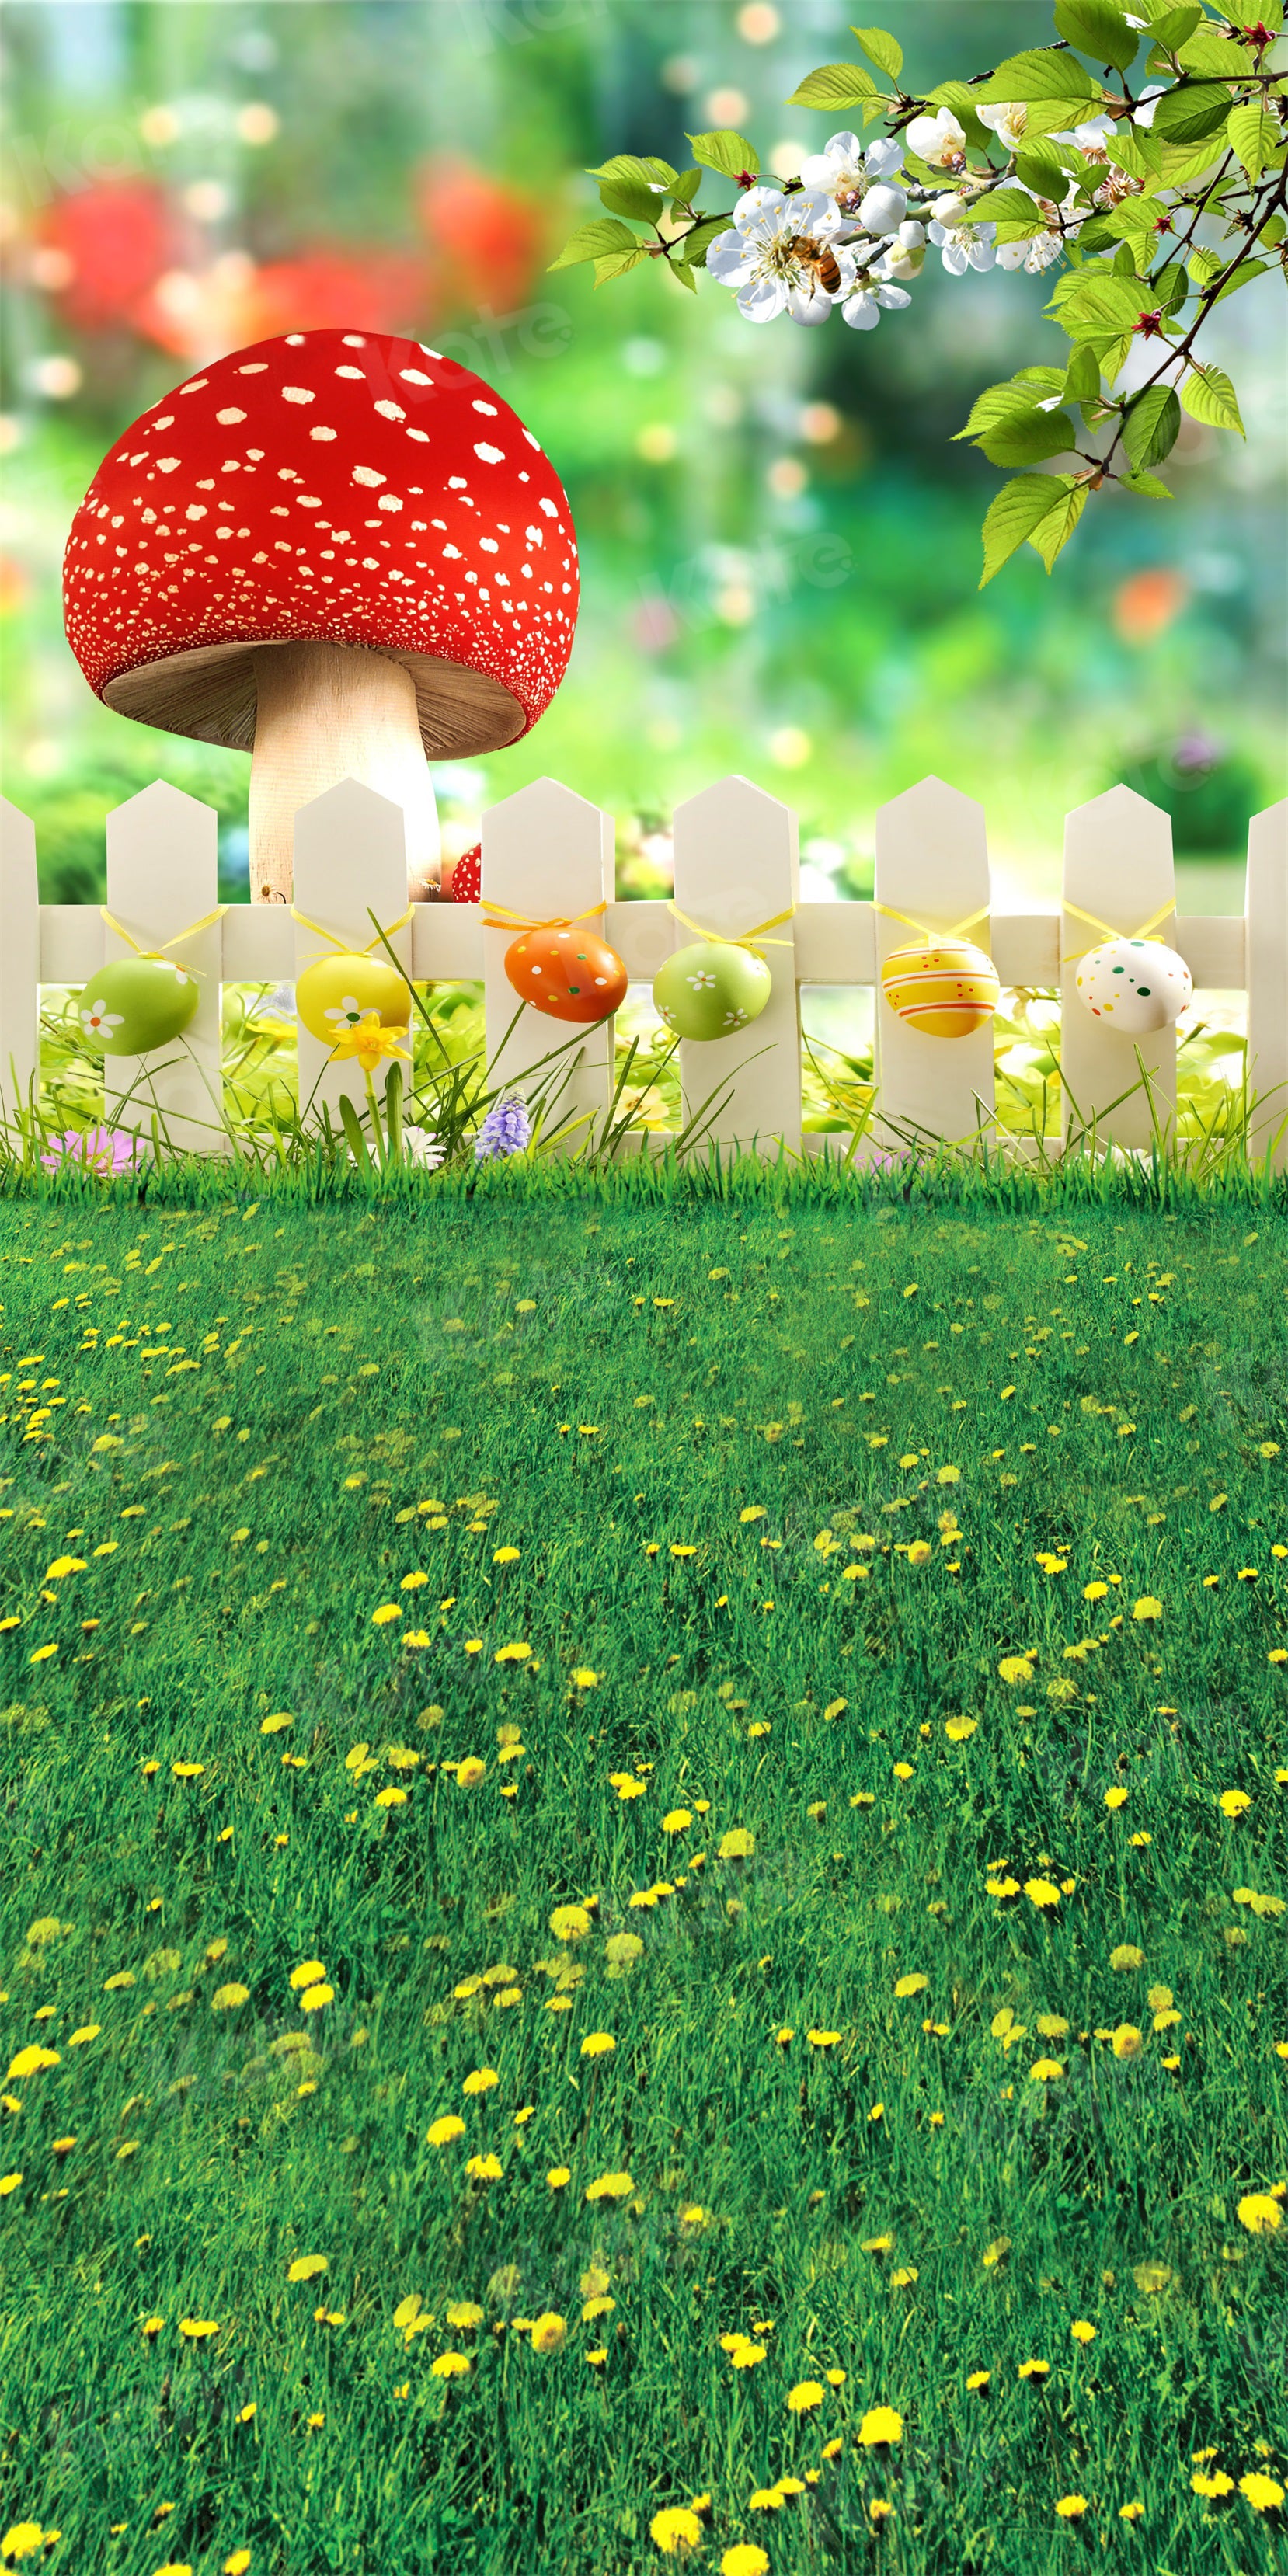 Kate Easter Backdrops Natural Scenery Spring Photography Yellow Flowers Colorful Eggs Photo Background